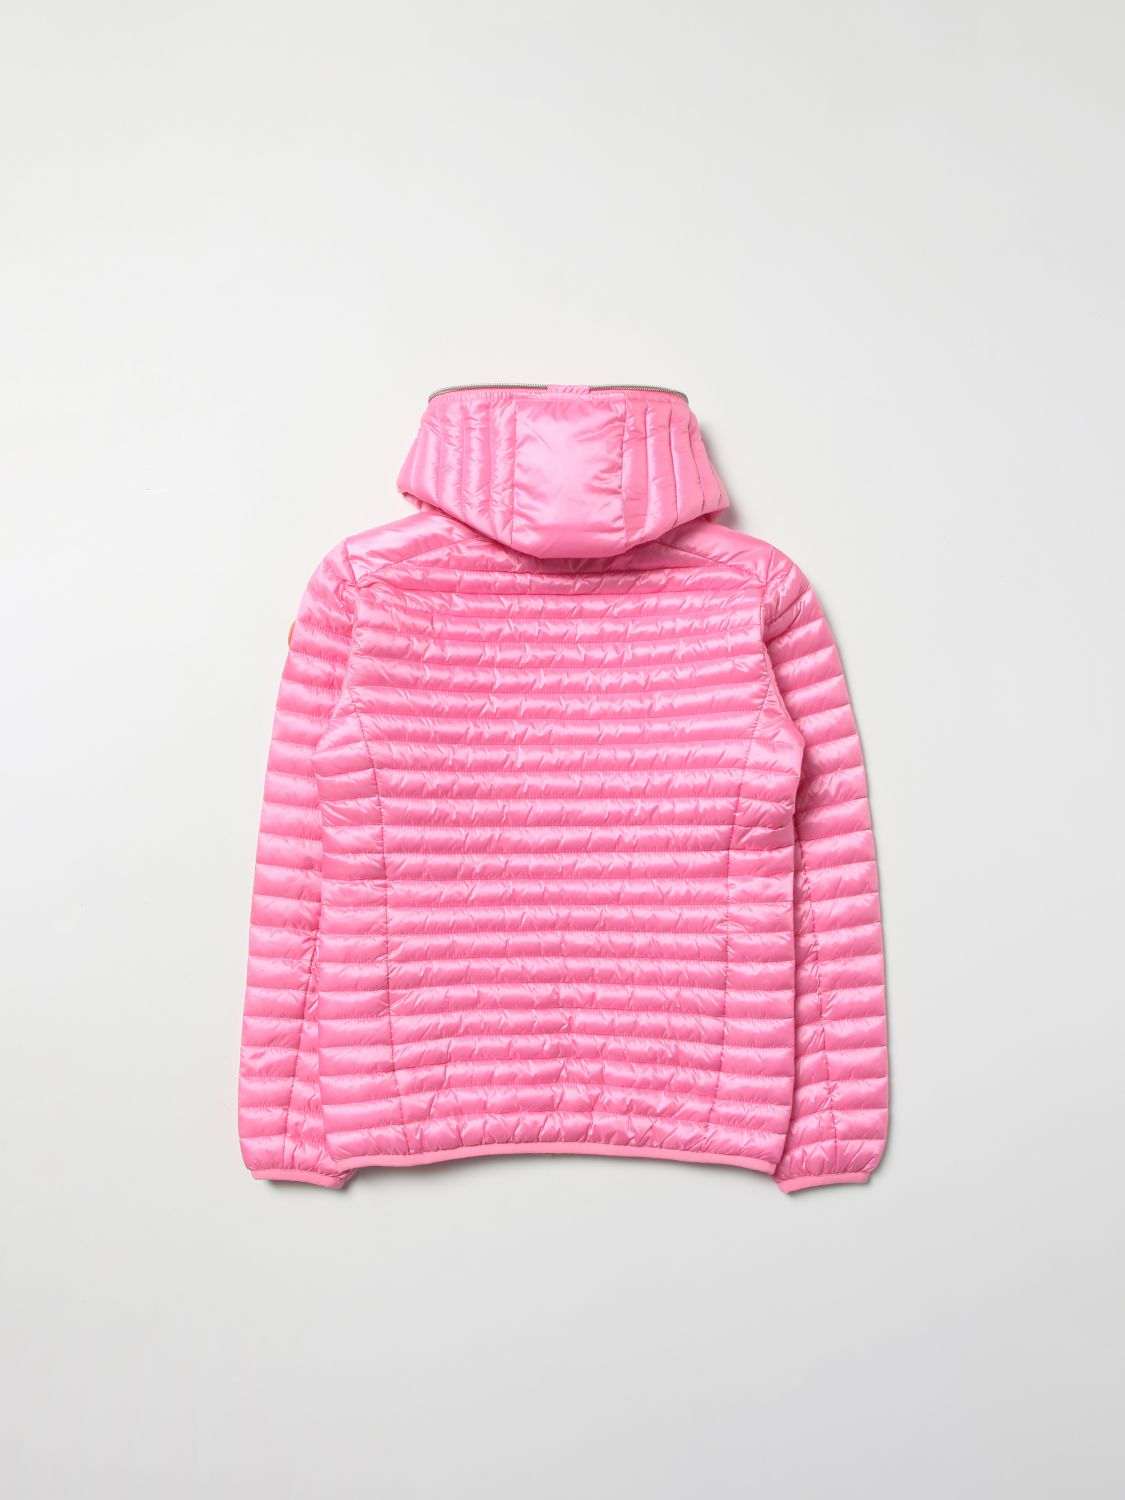 Jacket Save The Duck: Jacket kids Save The Duck pink 2